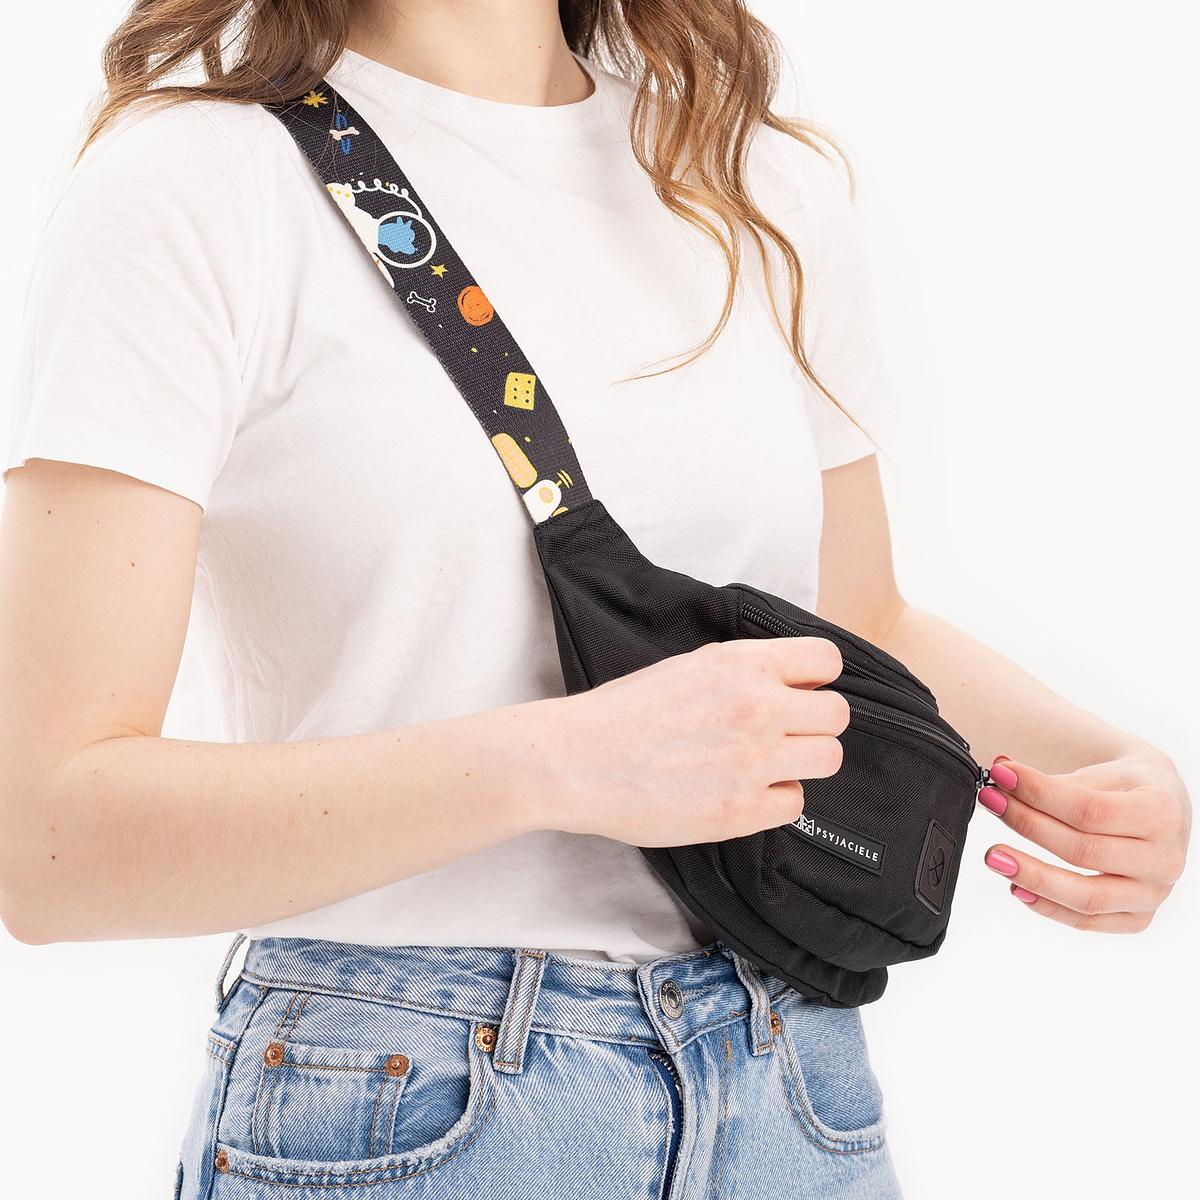 Balck fanny pack "I need space"